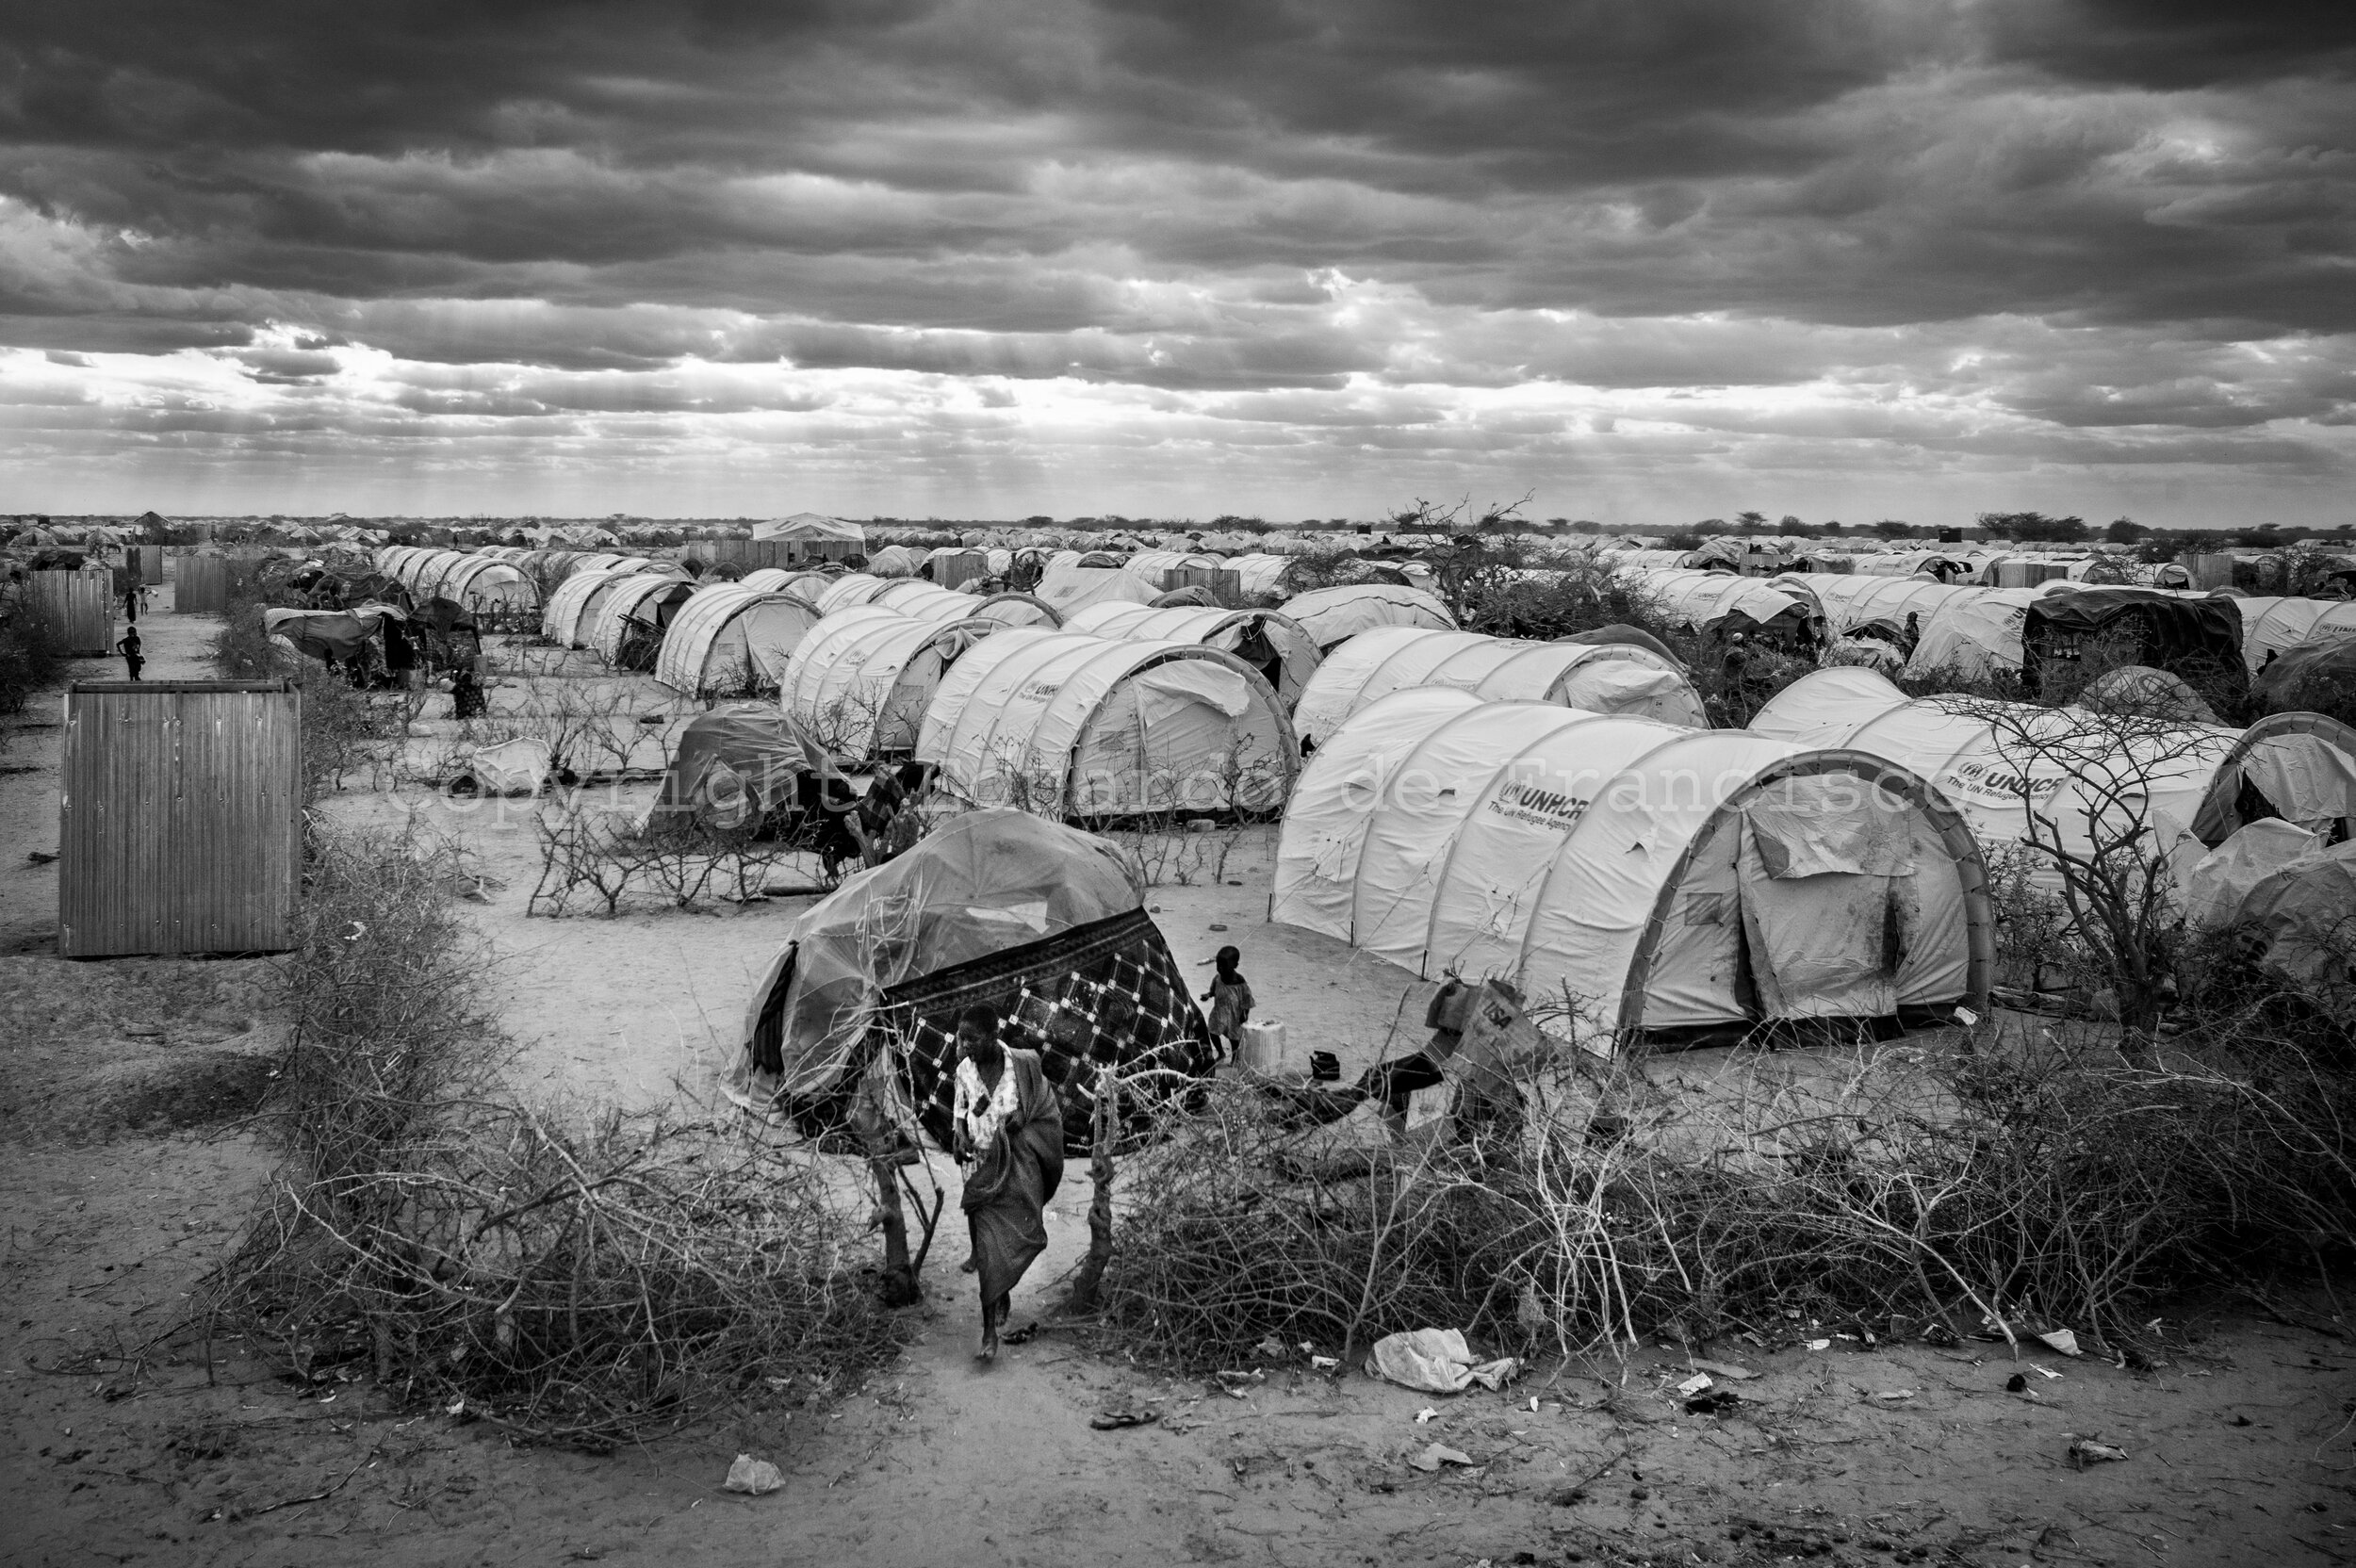  Panoramic view of a recently habilitated section of Ifo refugee camp near Dadaab. More than half a million Somali refugees live in four camps surrounding Dadaab in Eastern Kenya, which continue receiving a constant influx of families escaping drough